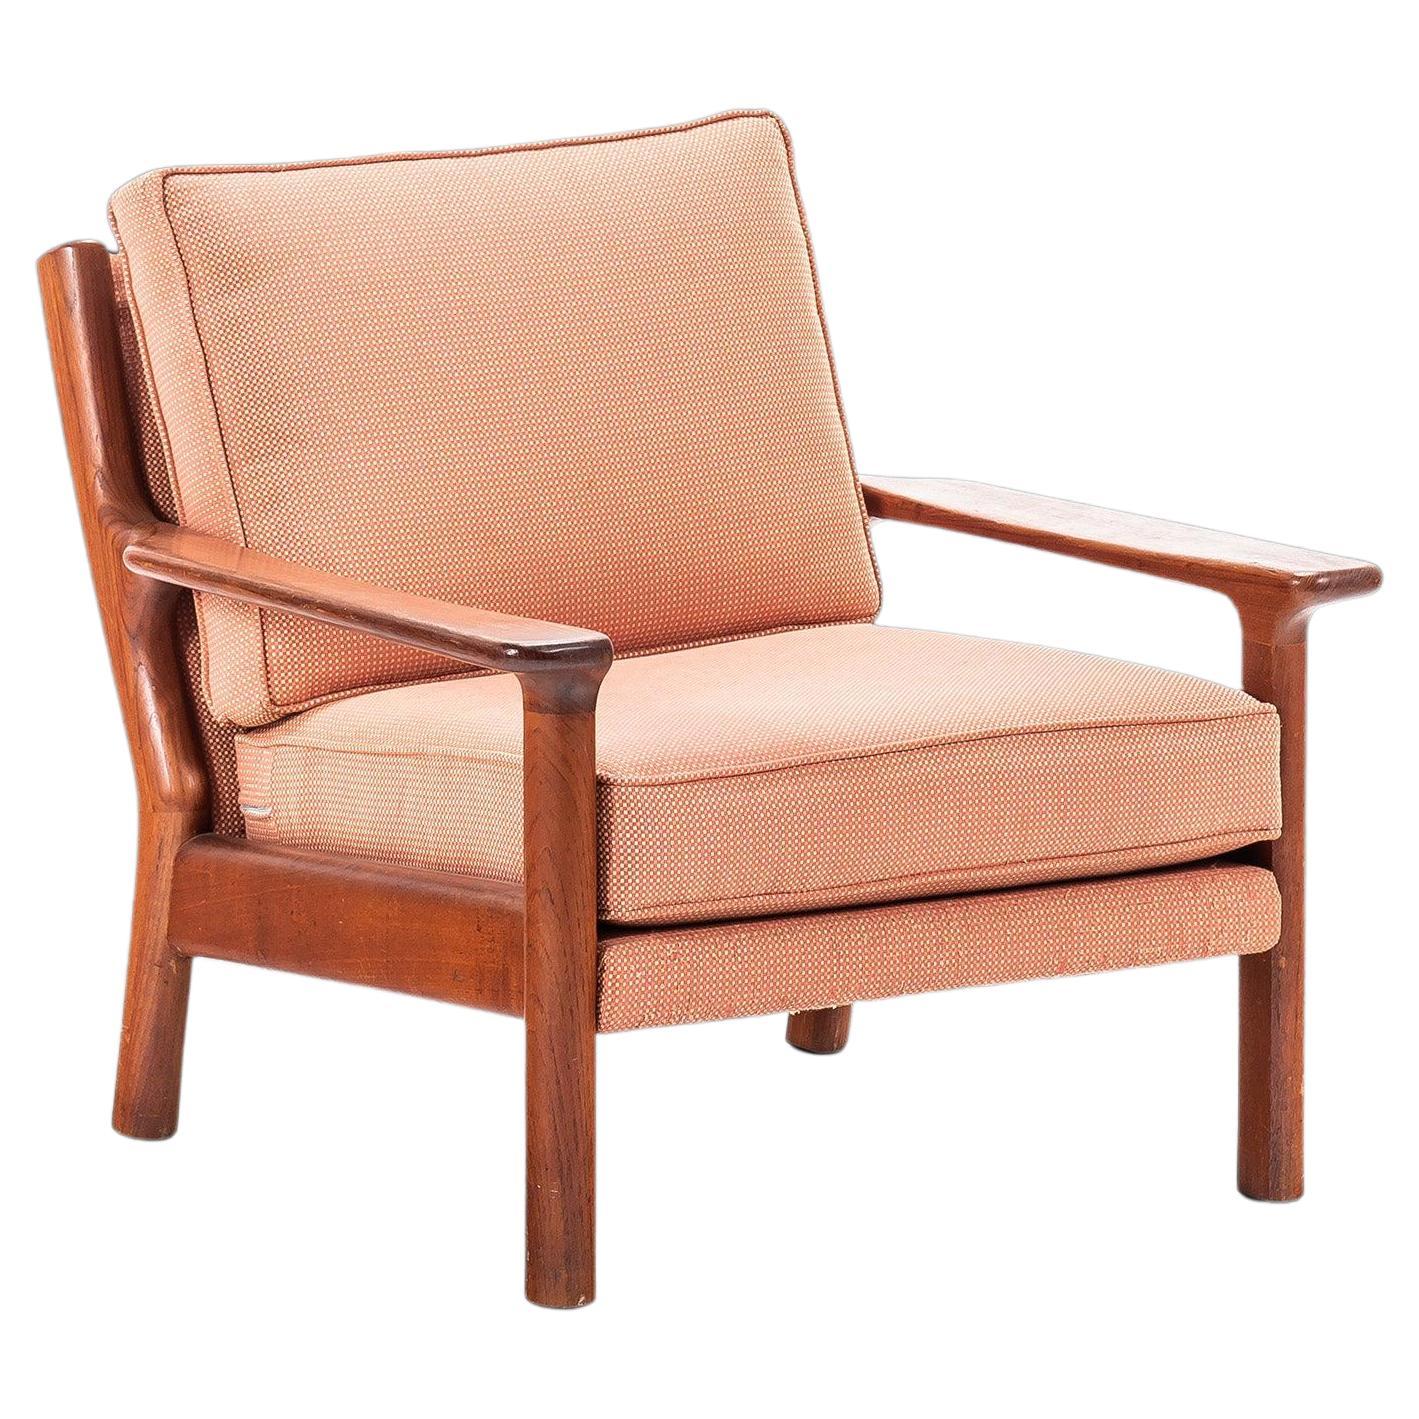 Mid-Century Modern Teak Lounge Chair in the Manner of Poul Volther, c. 1970's For Sale